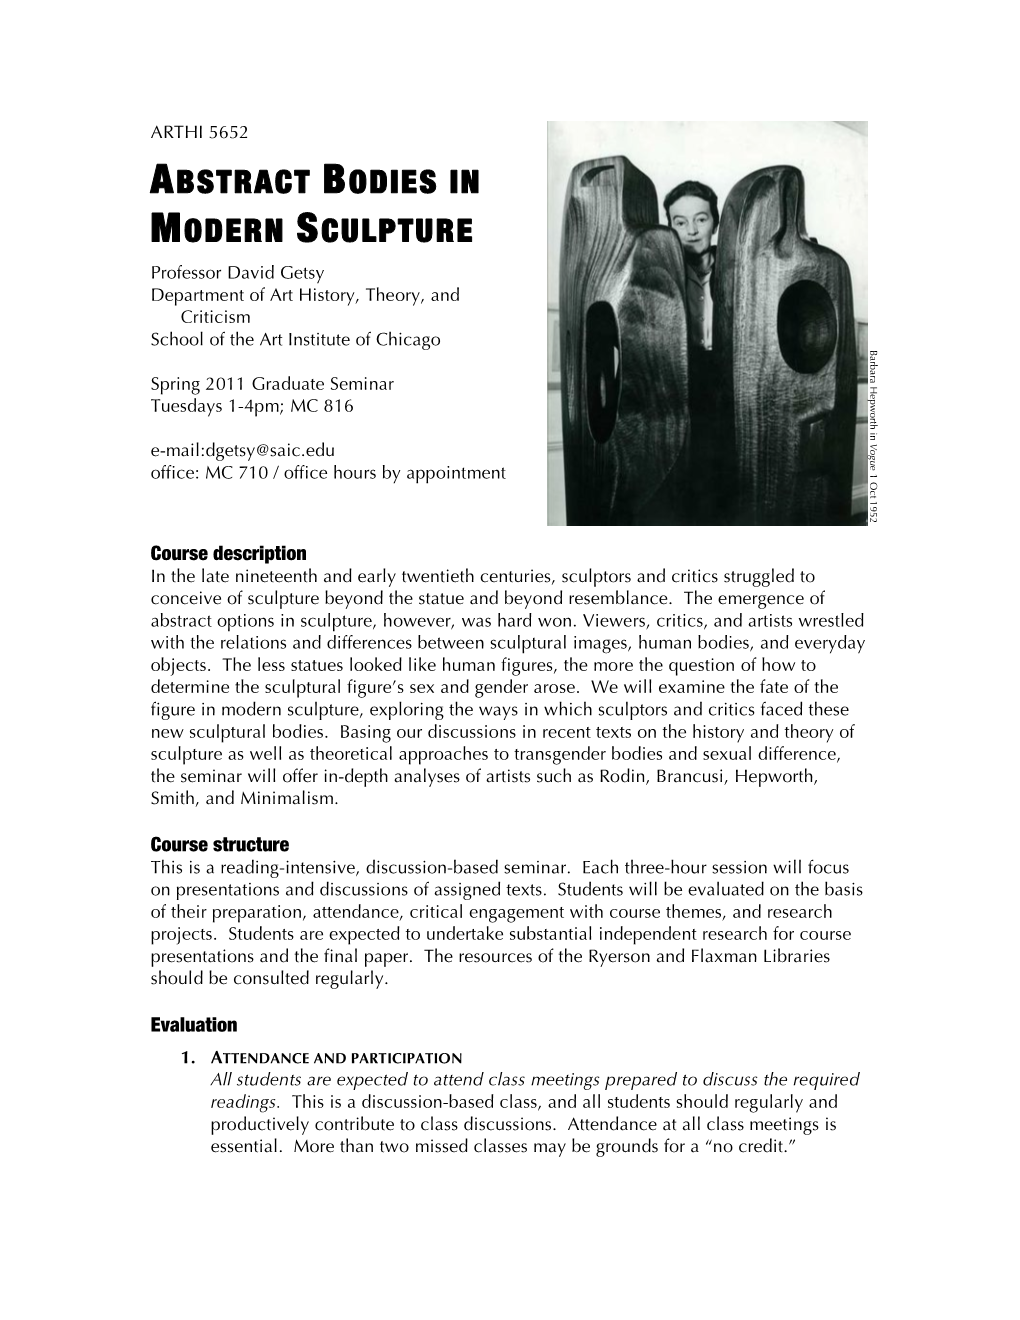 ABSTRACT BODIES in MODERN SCULPTURE Professor David Getsy Department of Art History, Theory, and Criticism